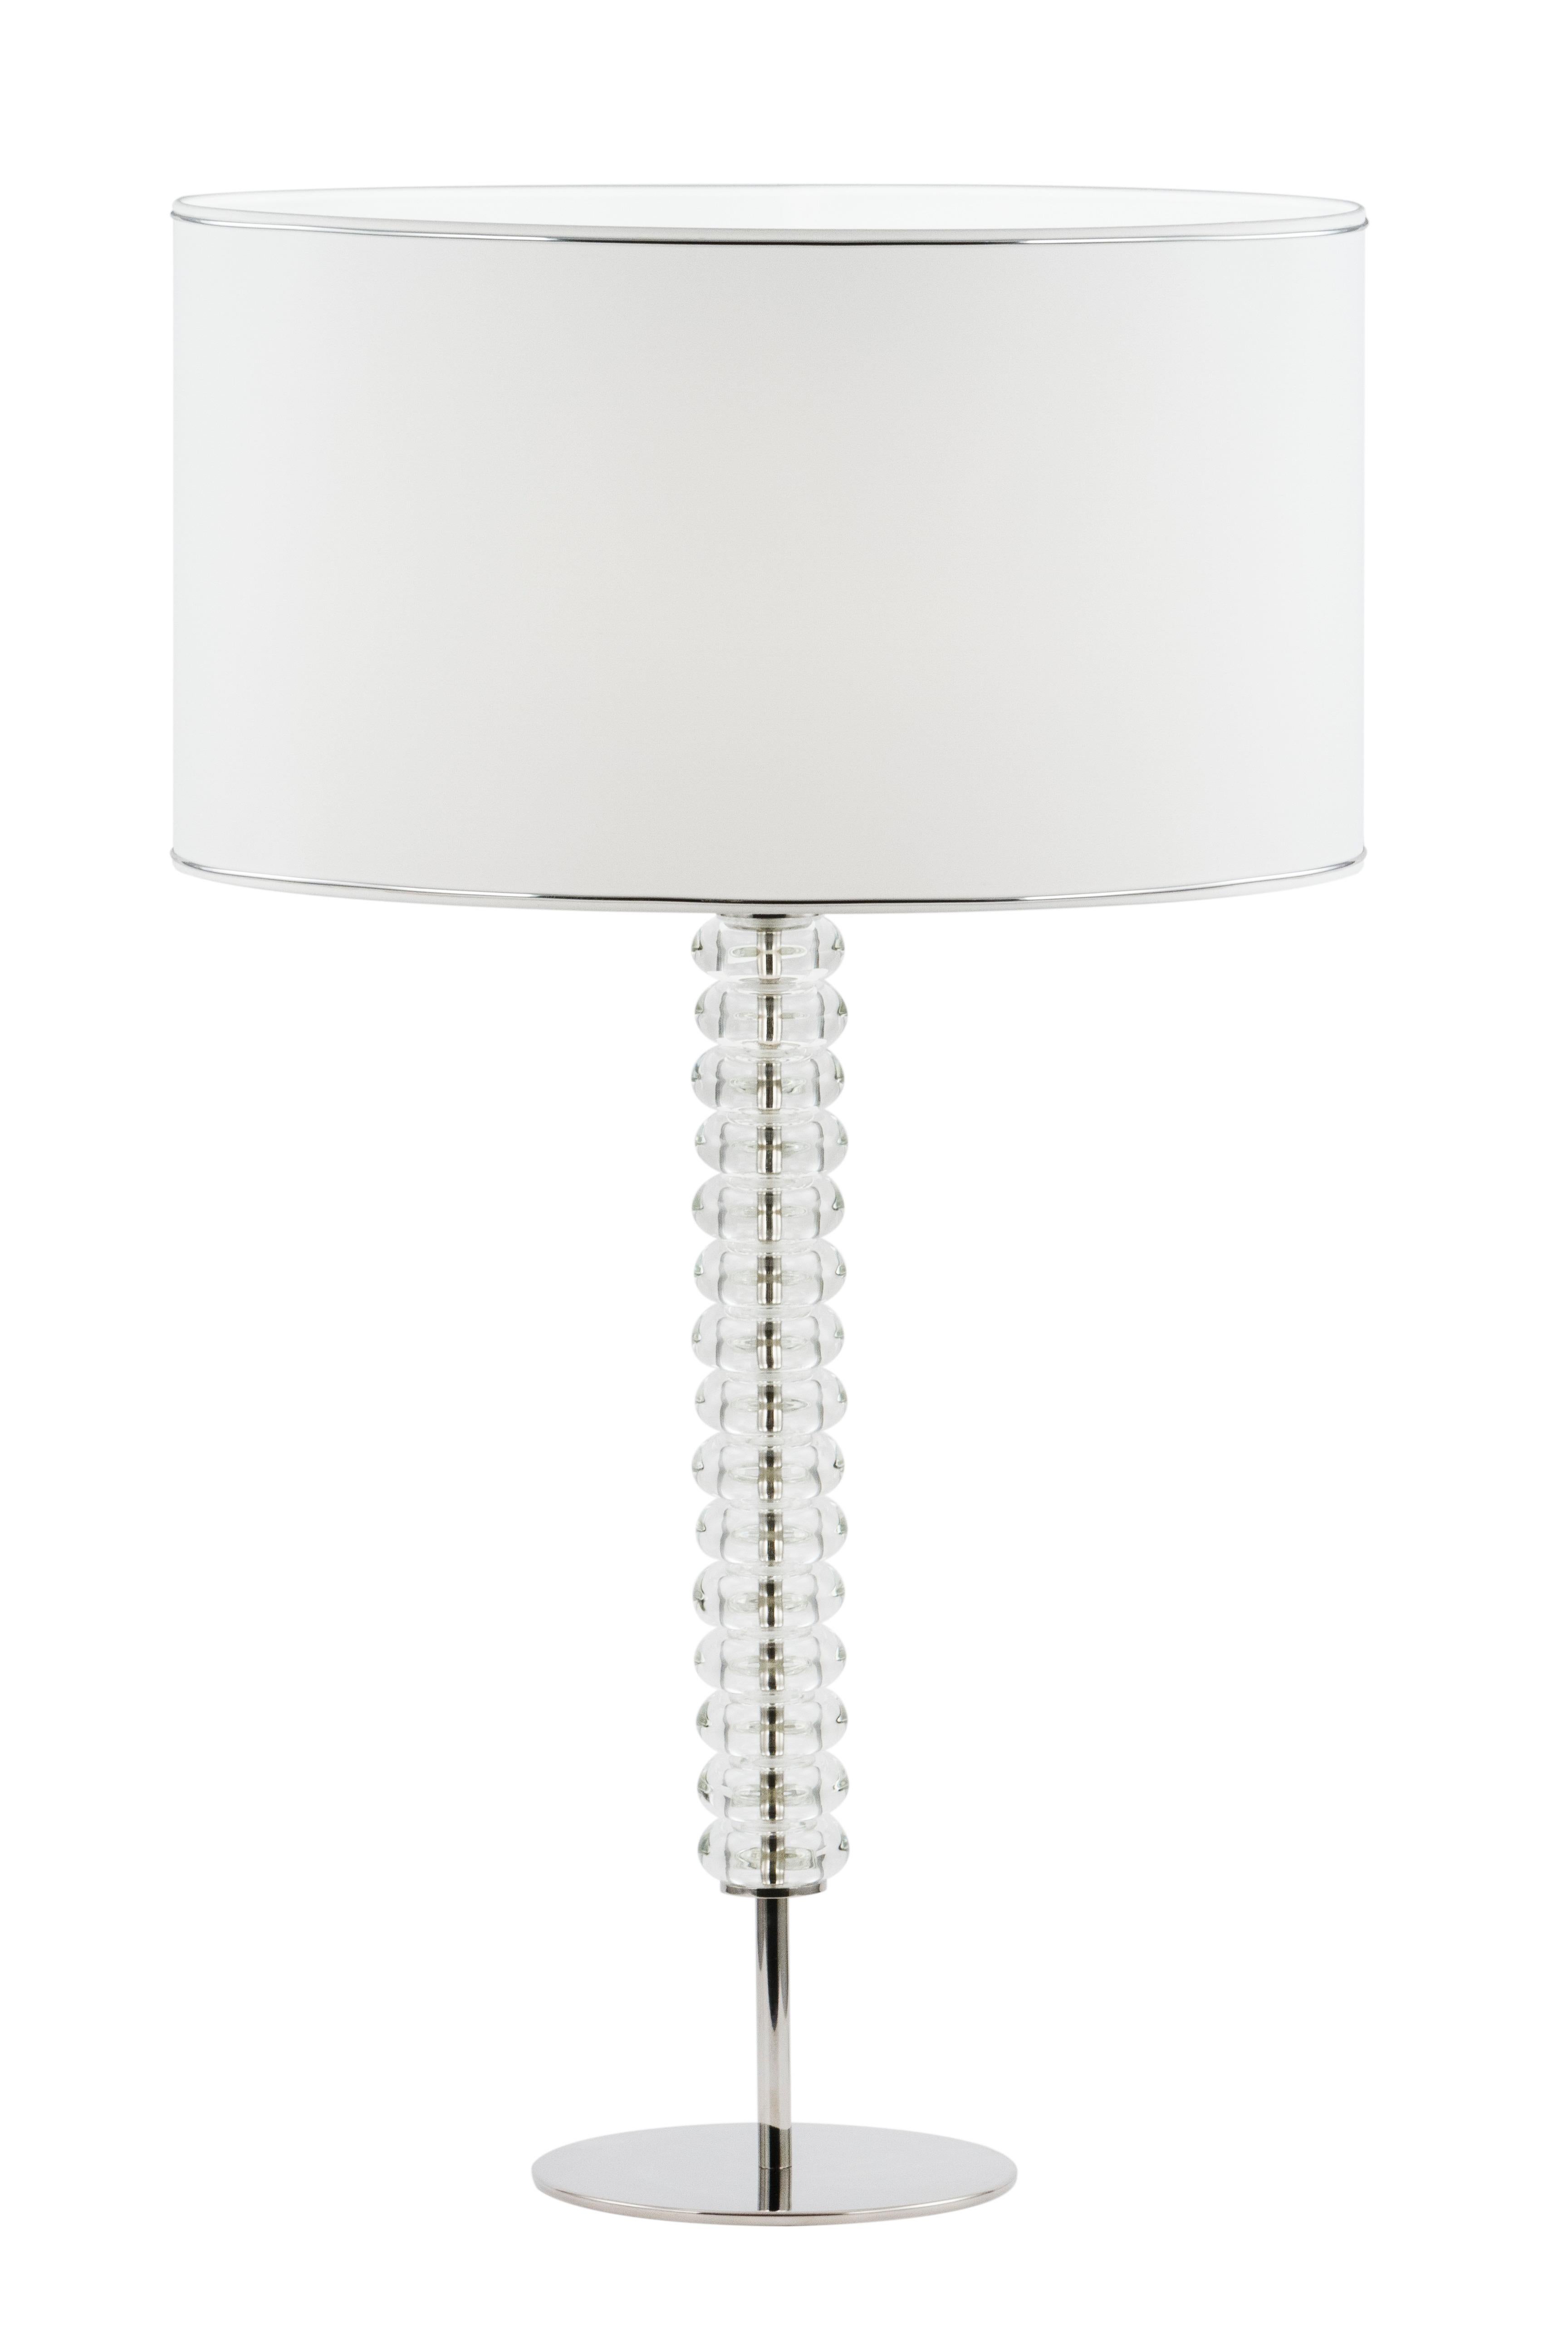 Portuguese Set of 2 Modern Saldanha Table Lamps, White Shade, Handmade in Portugal For Sale